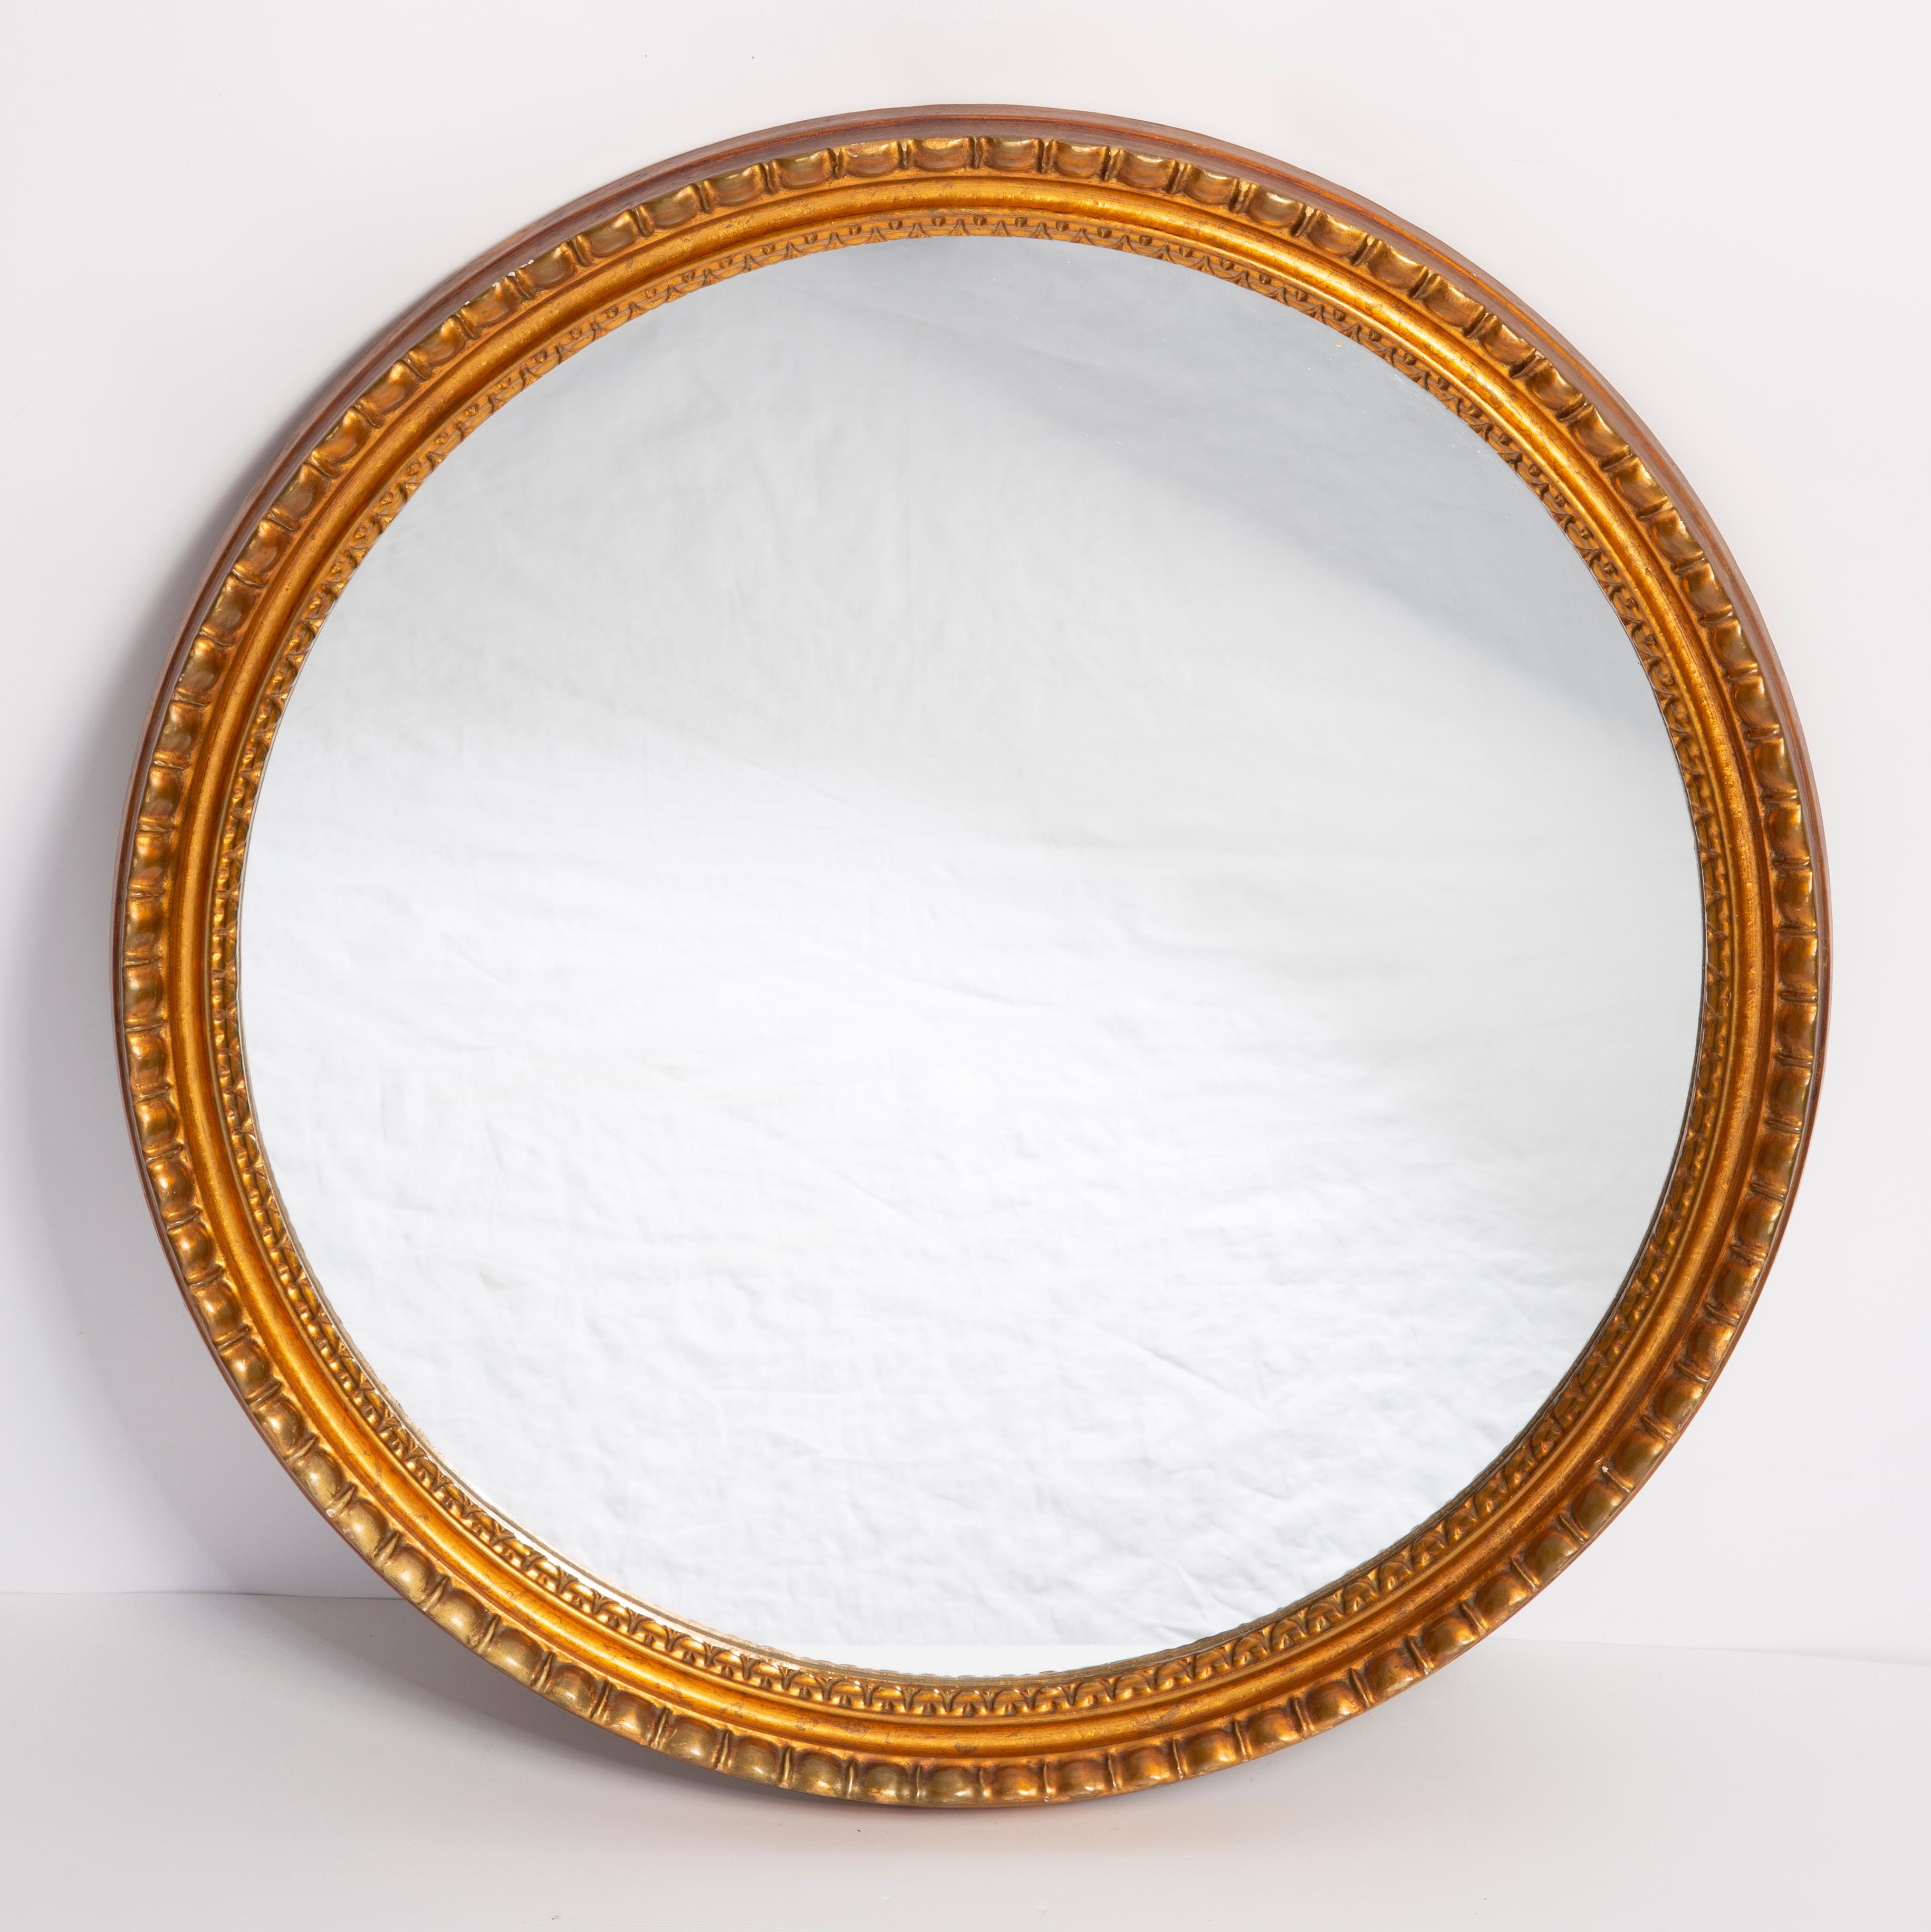 Vintage Oval Gold and Black Decorative Mirror in Flowers Frame, Italy, 1960s In Good Condition For Sale In 05-080 Hornowek, PL